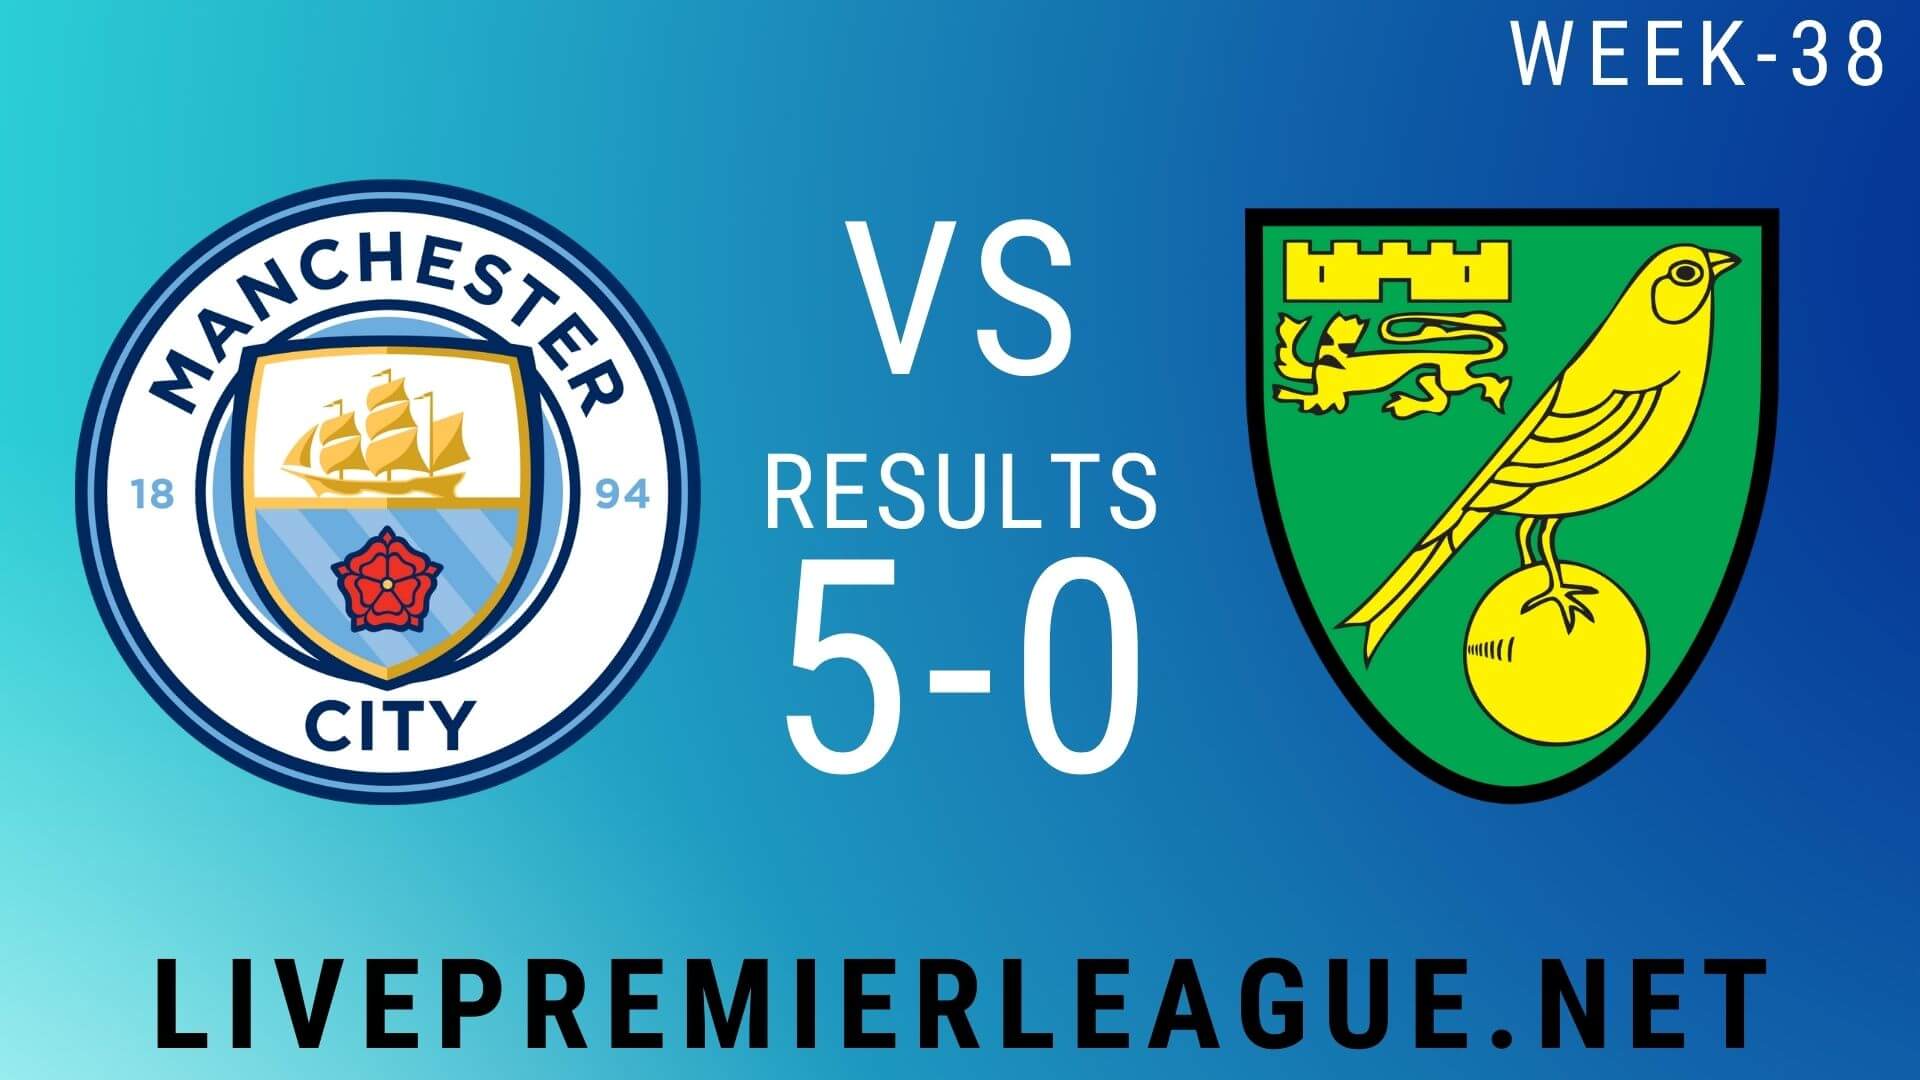 Manchester City Vs Norwich City | Week 38 Result 2020